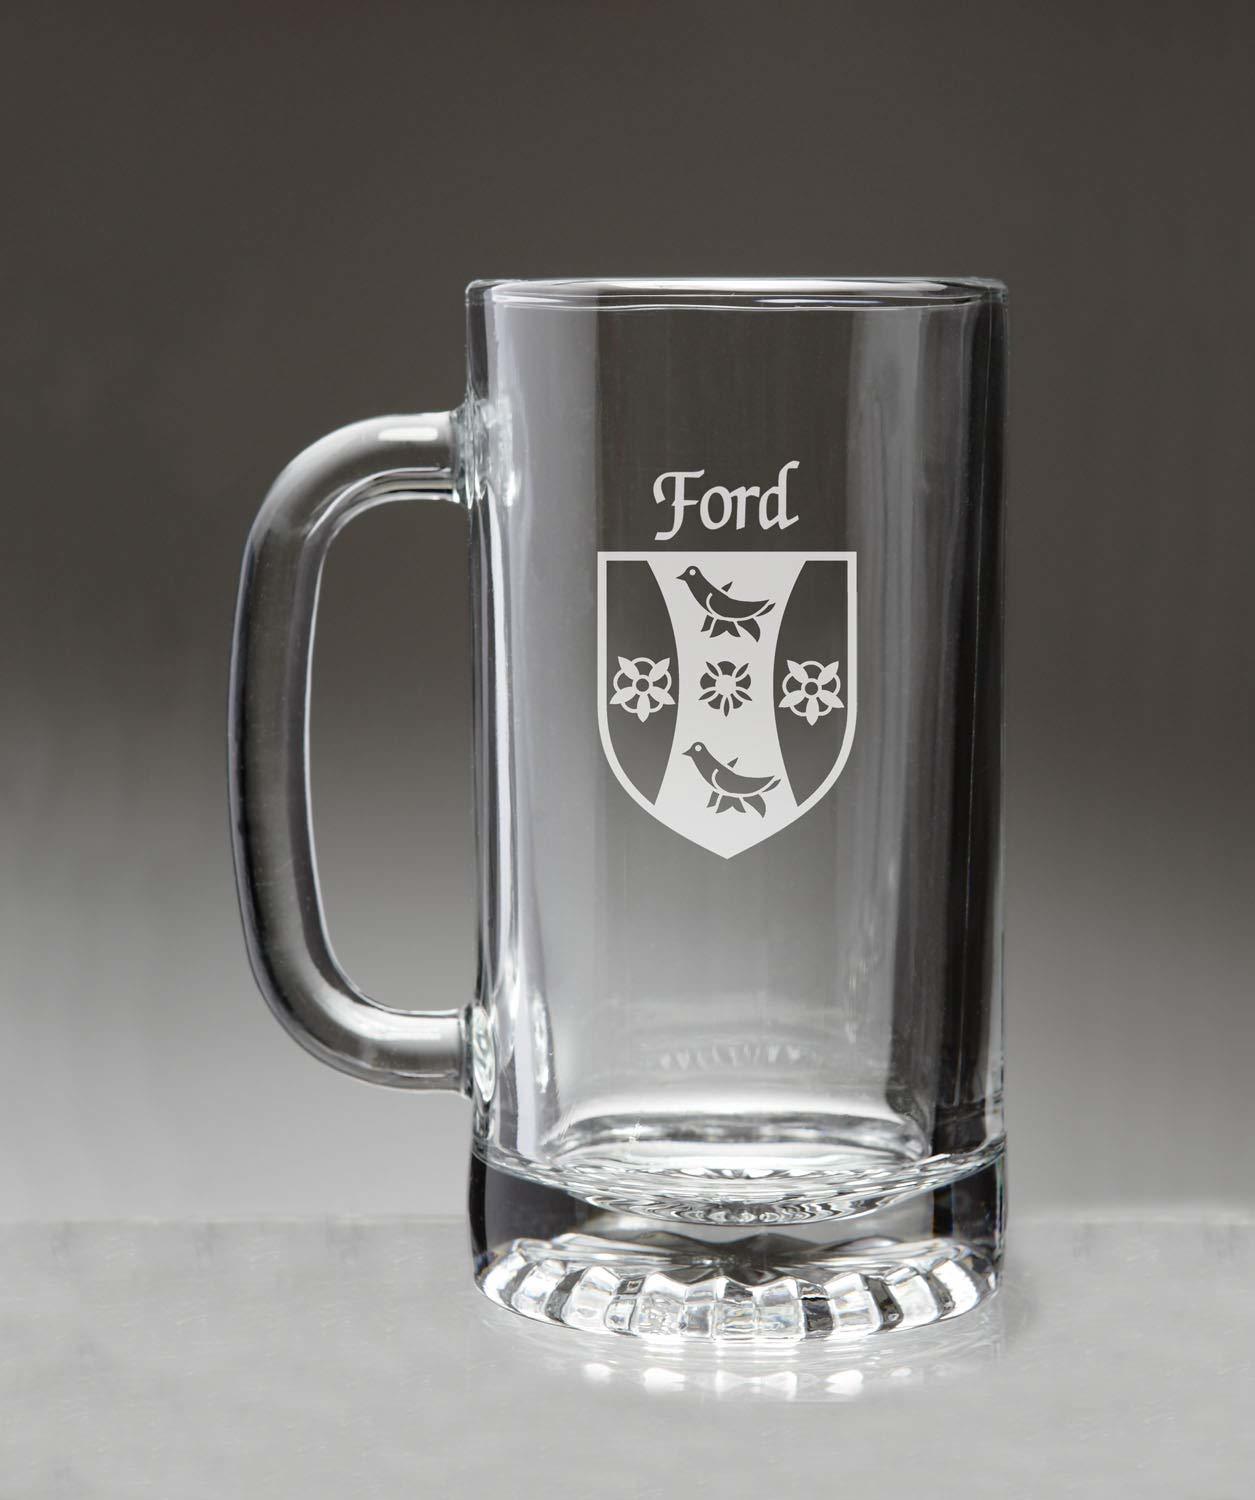 Primary image for Ford Irish Coat of Arms Glass Beer Mug (Sand Etched)